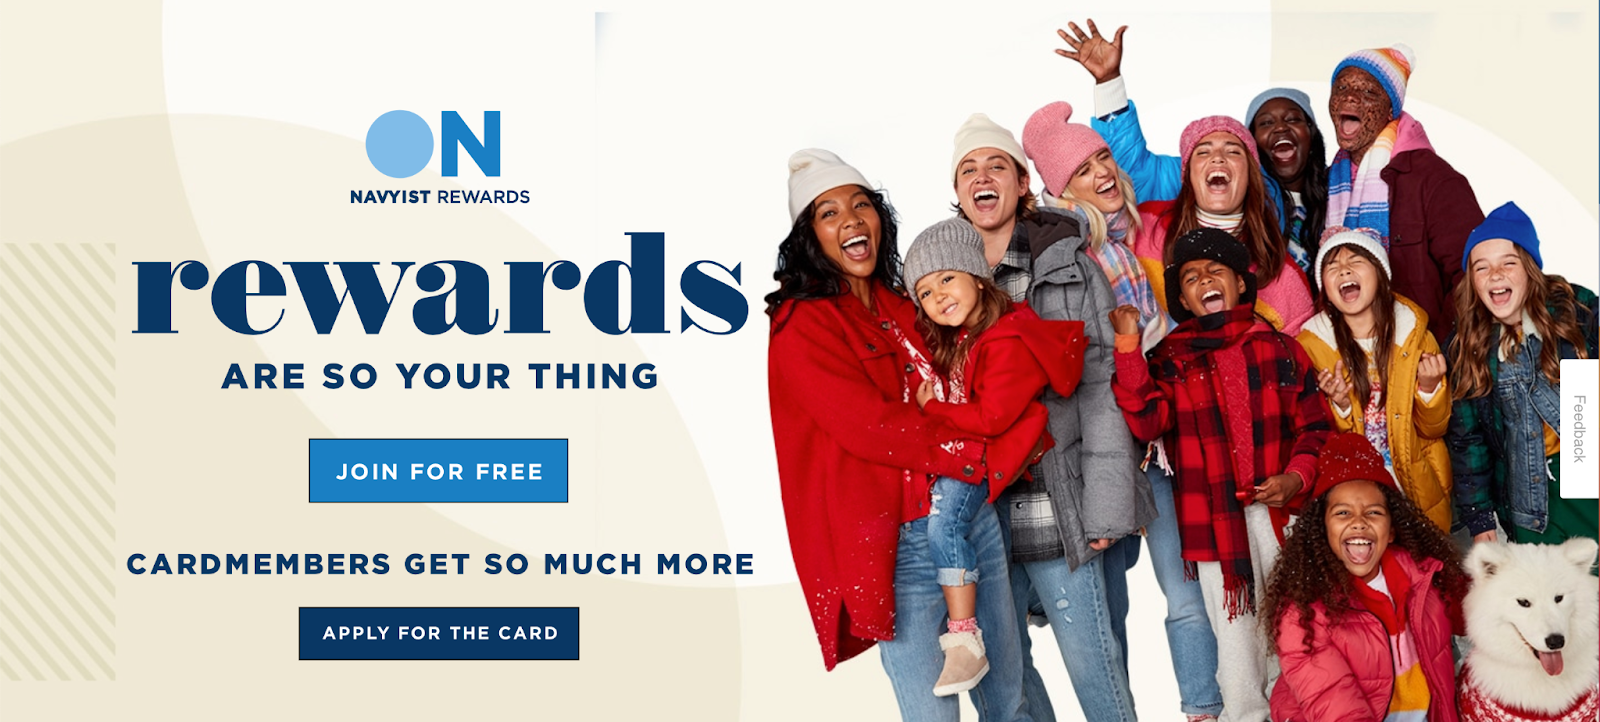 old-navy-rewards-literally-everything-you-need-to-know-the-real-deal